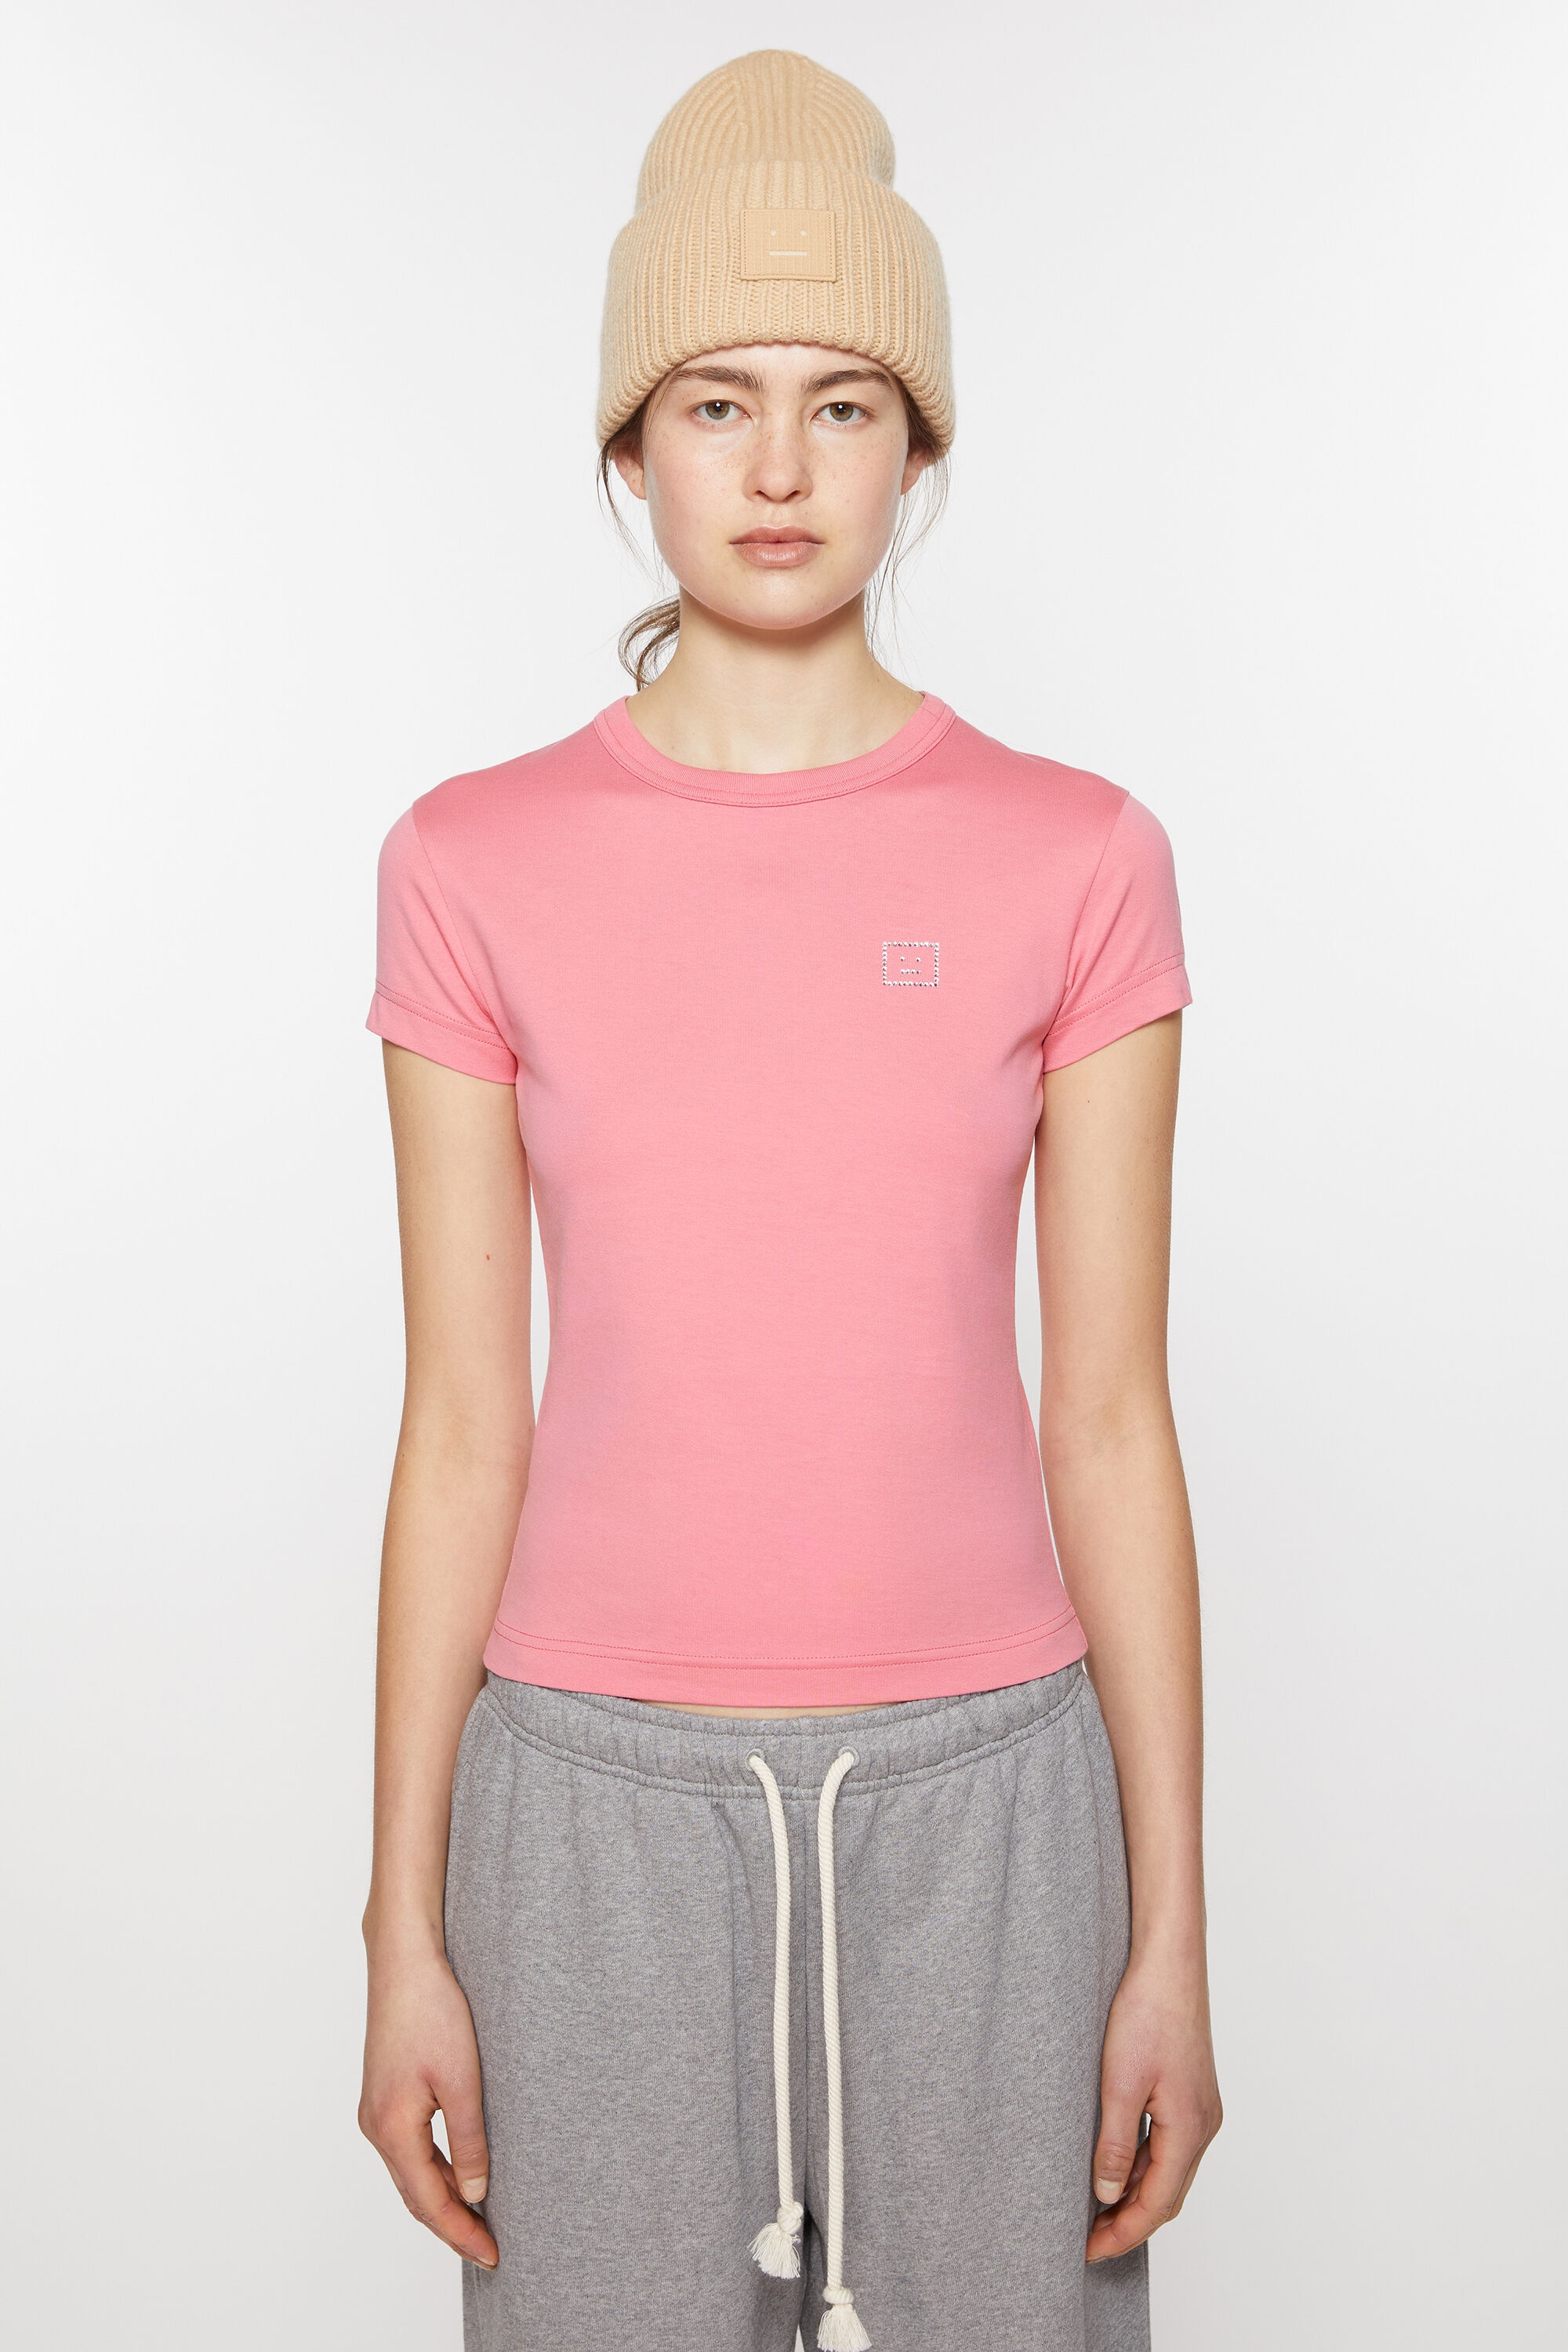 Crew neck t-shirt - Fitted fit - Tango pink - 2